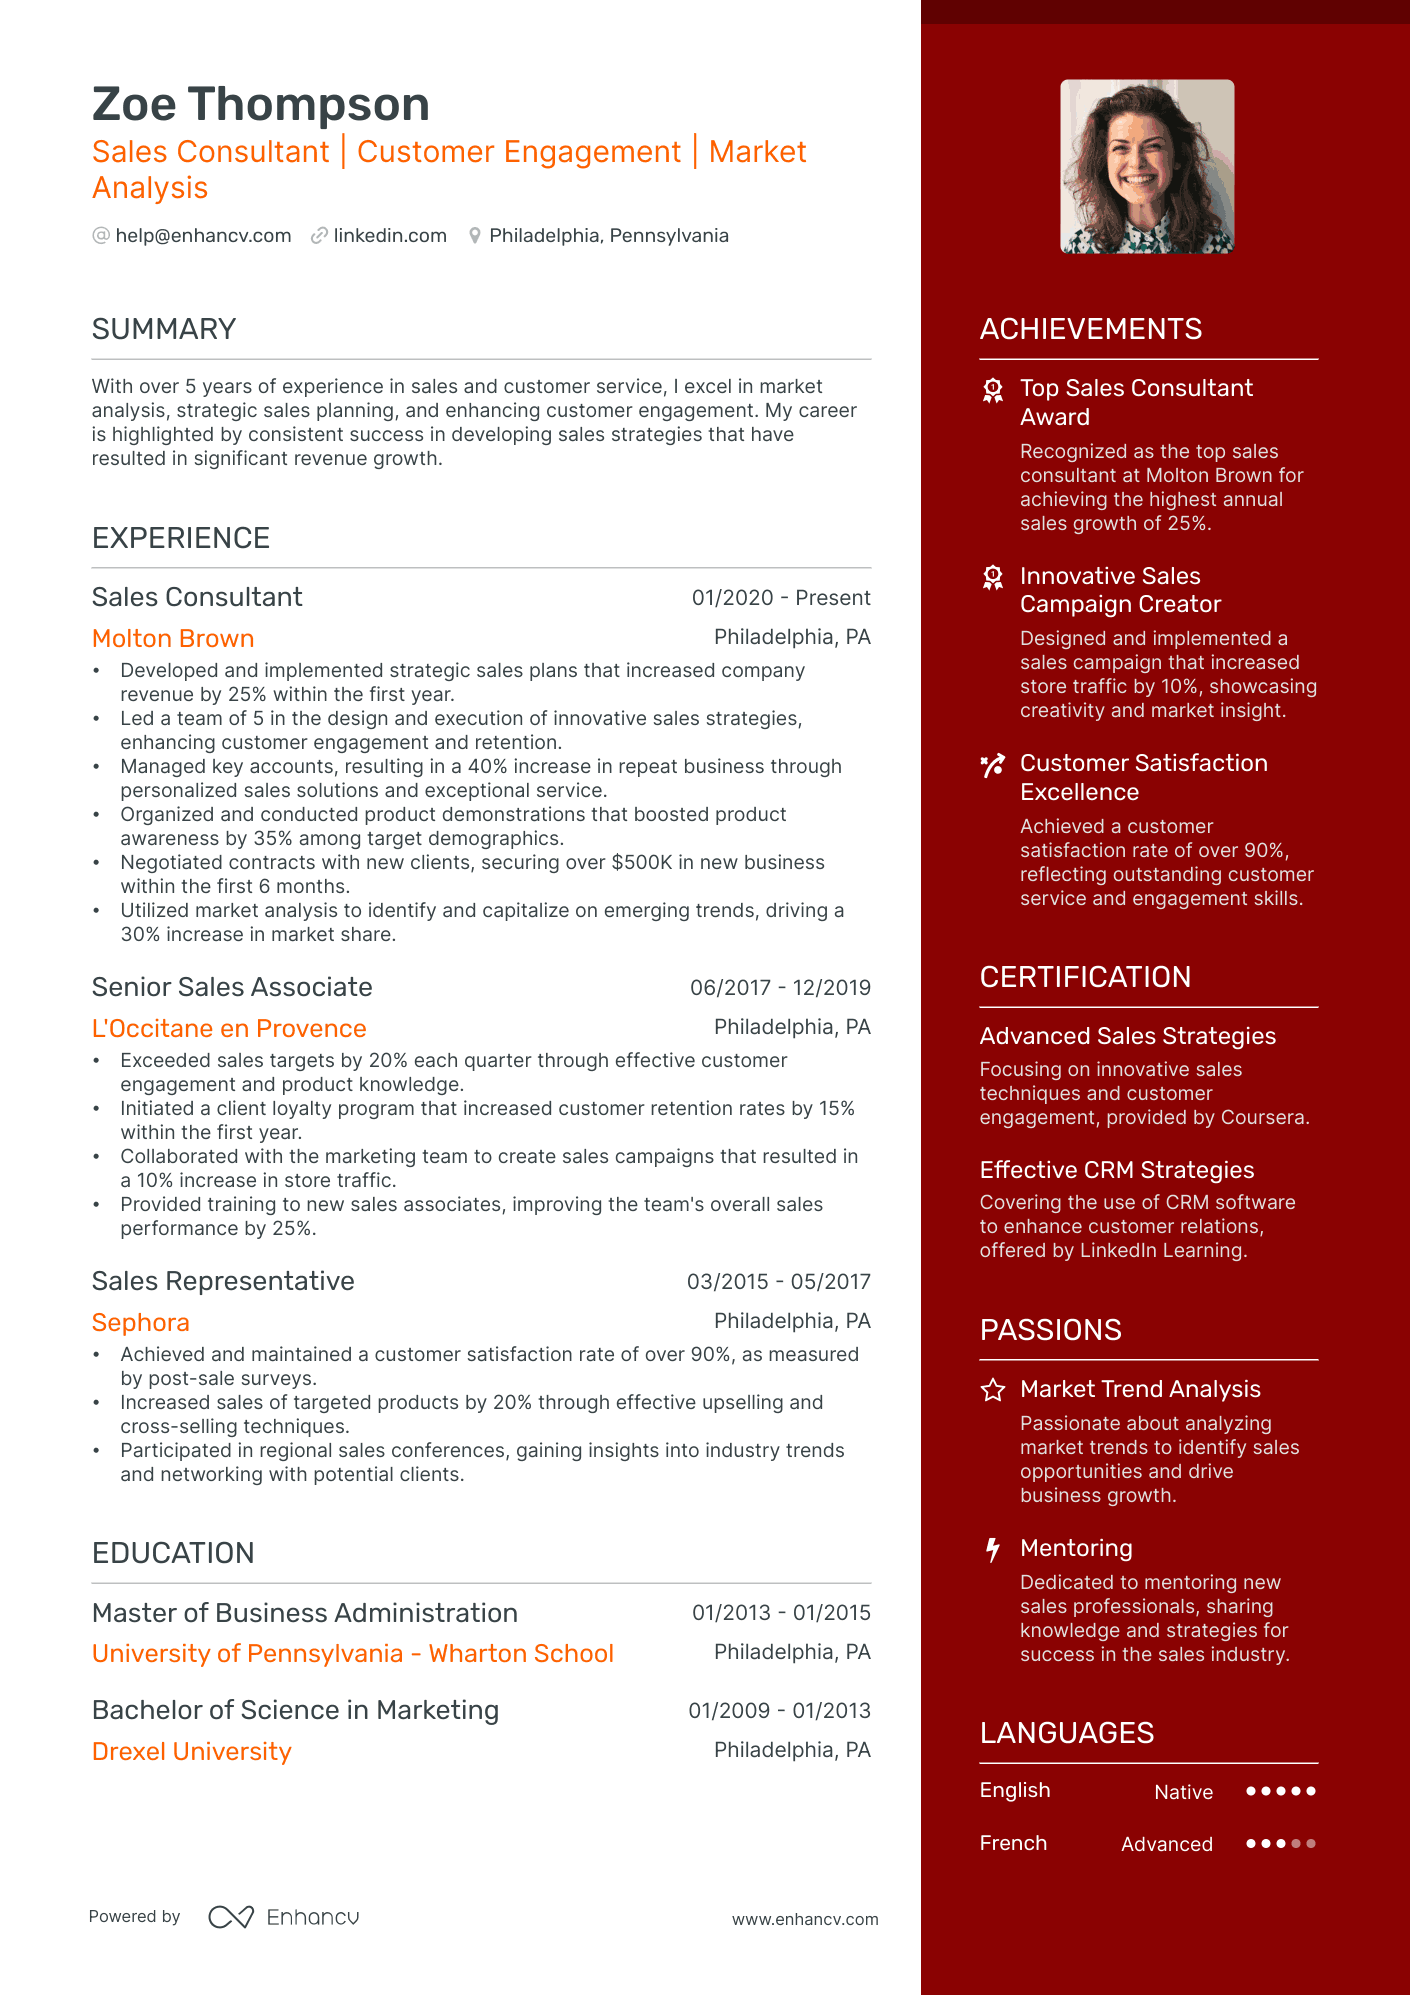 Sales Consultant | Customer Engagement | Market Analysis resume example